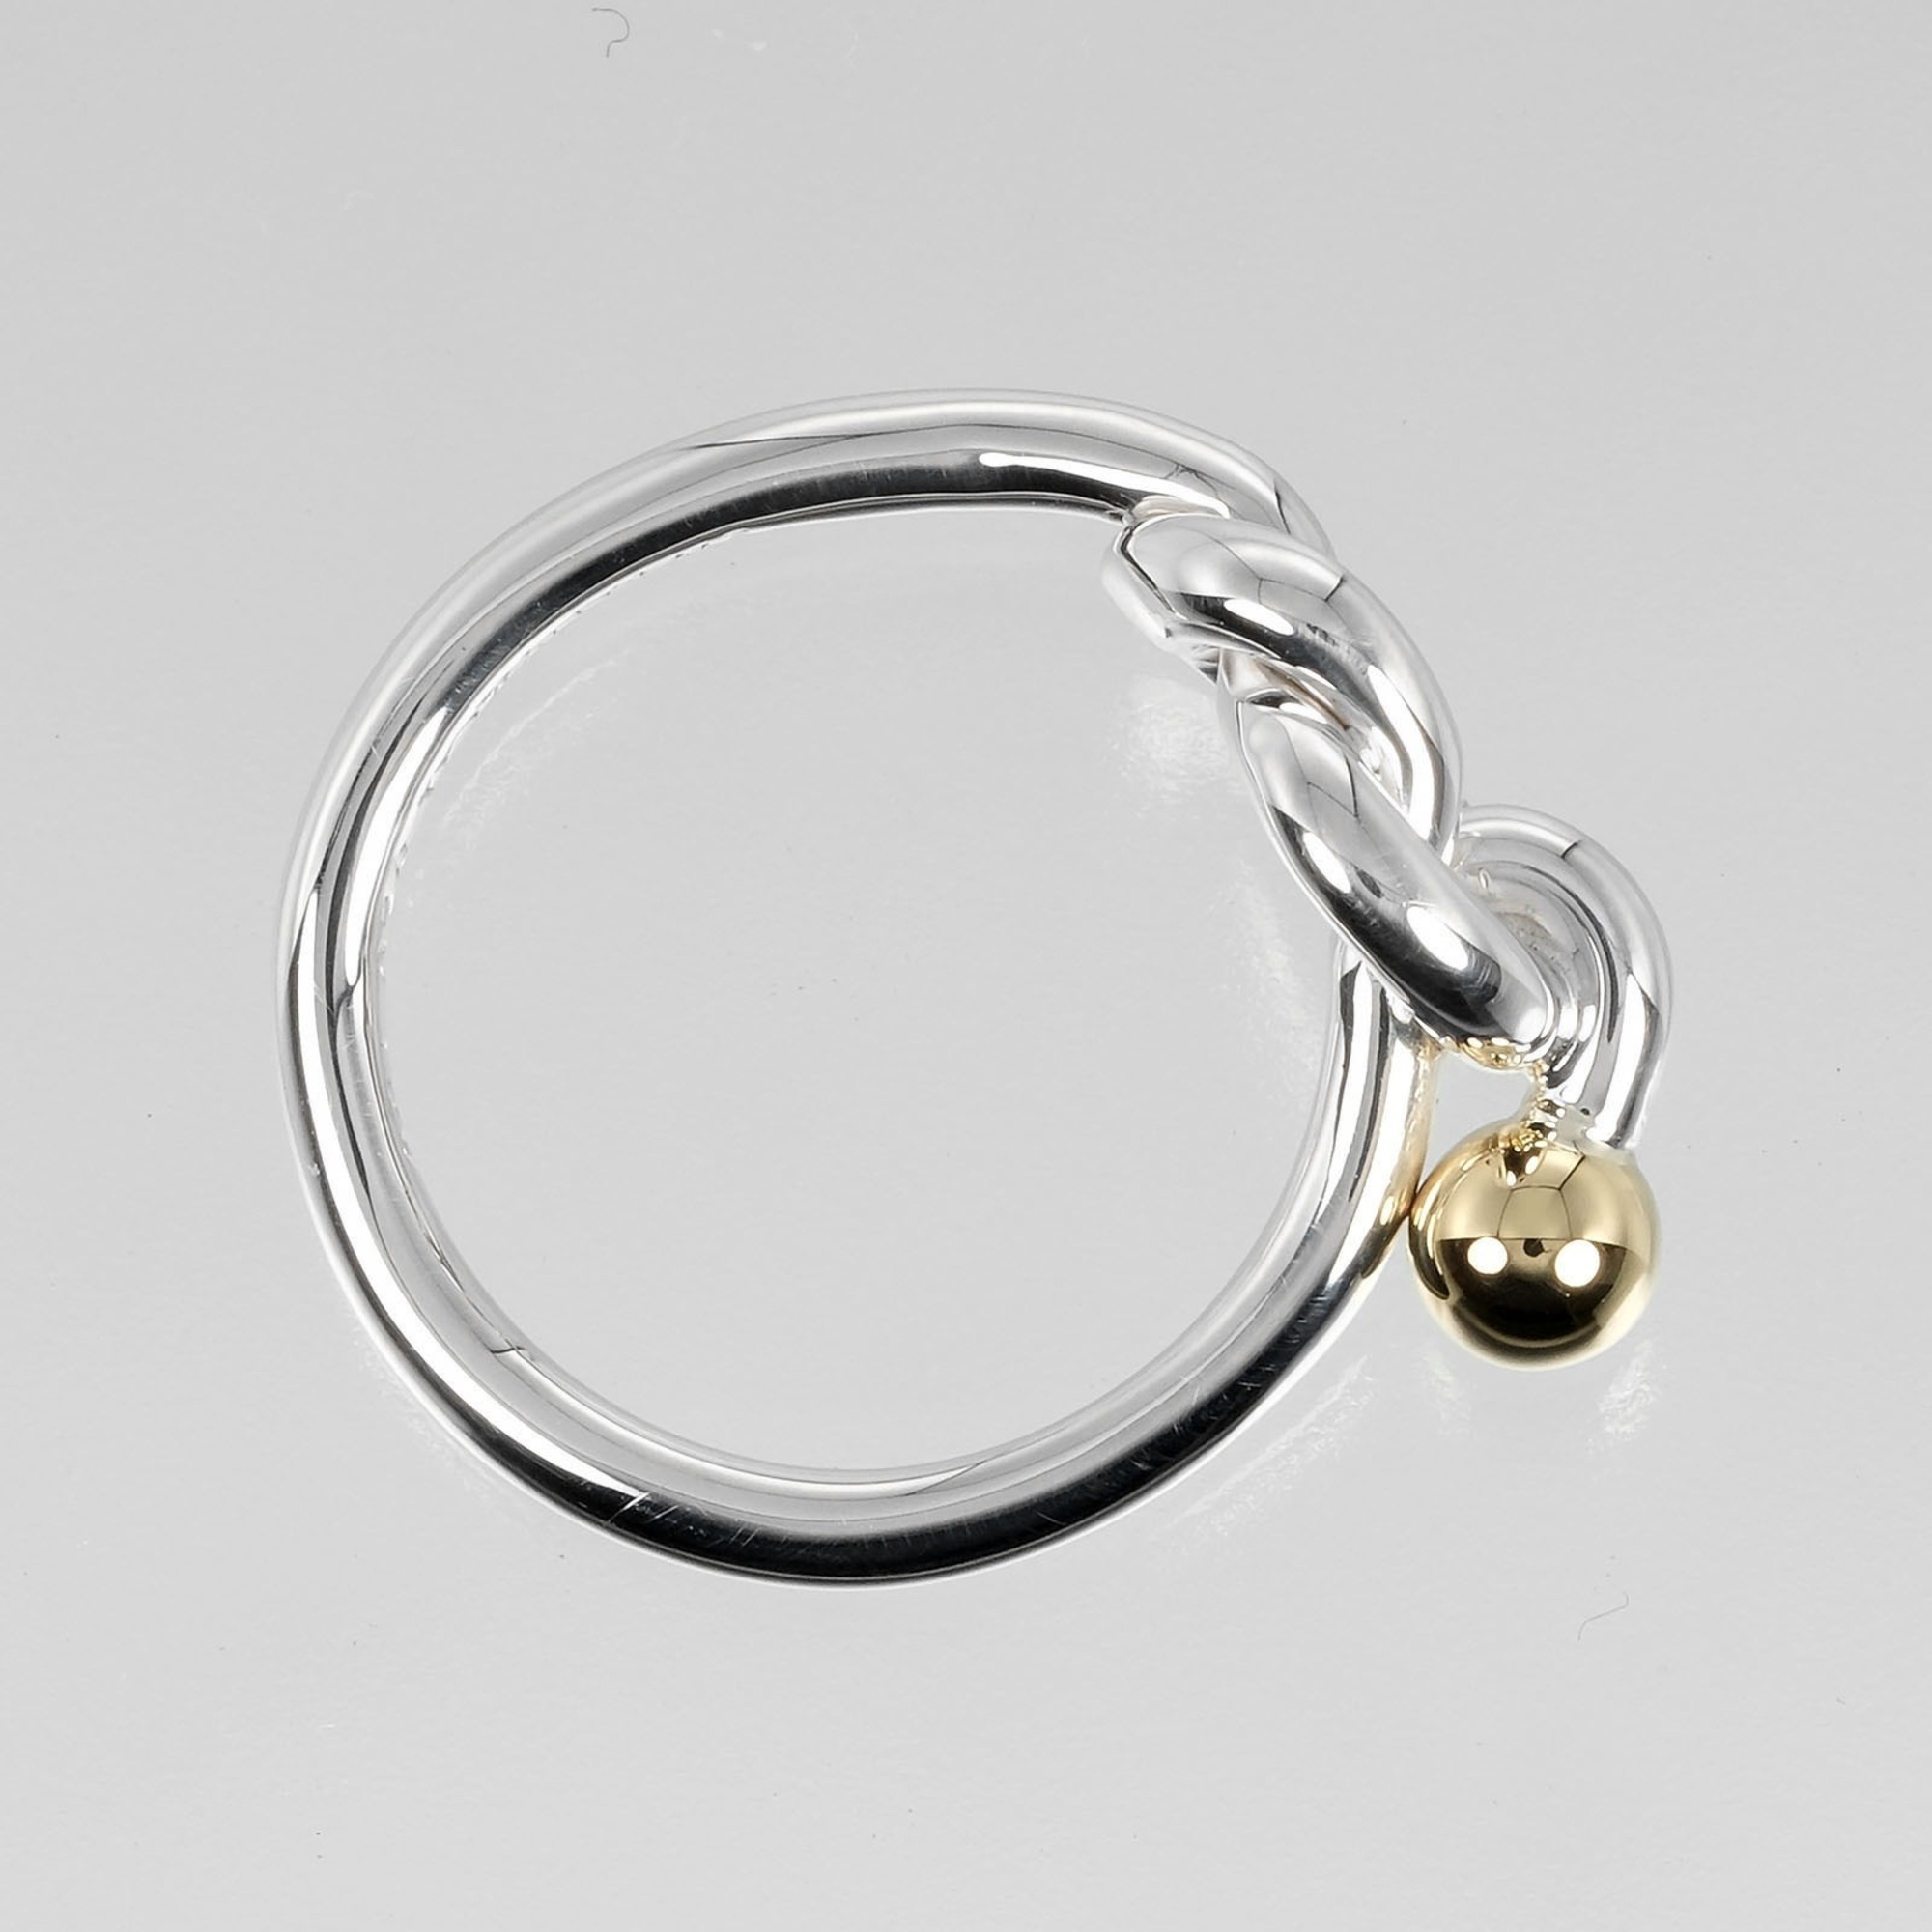 Tiffany & Co. Love Knot Ring, Size 6.5, 925 Silver, 18K Yellow Gold, Approx. 2.86g I132724007